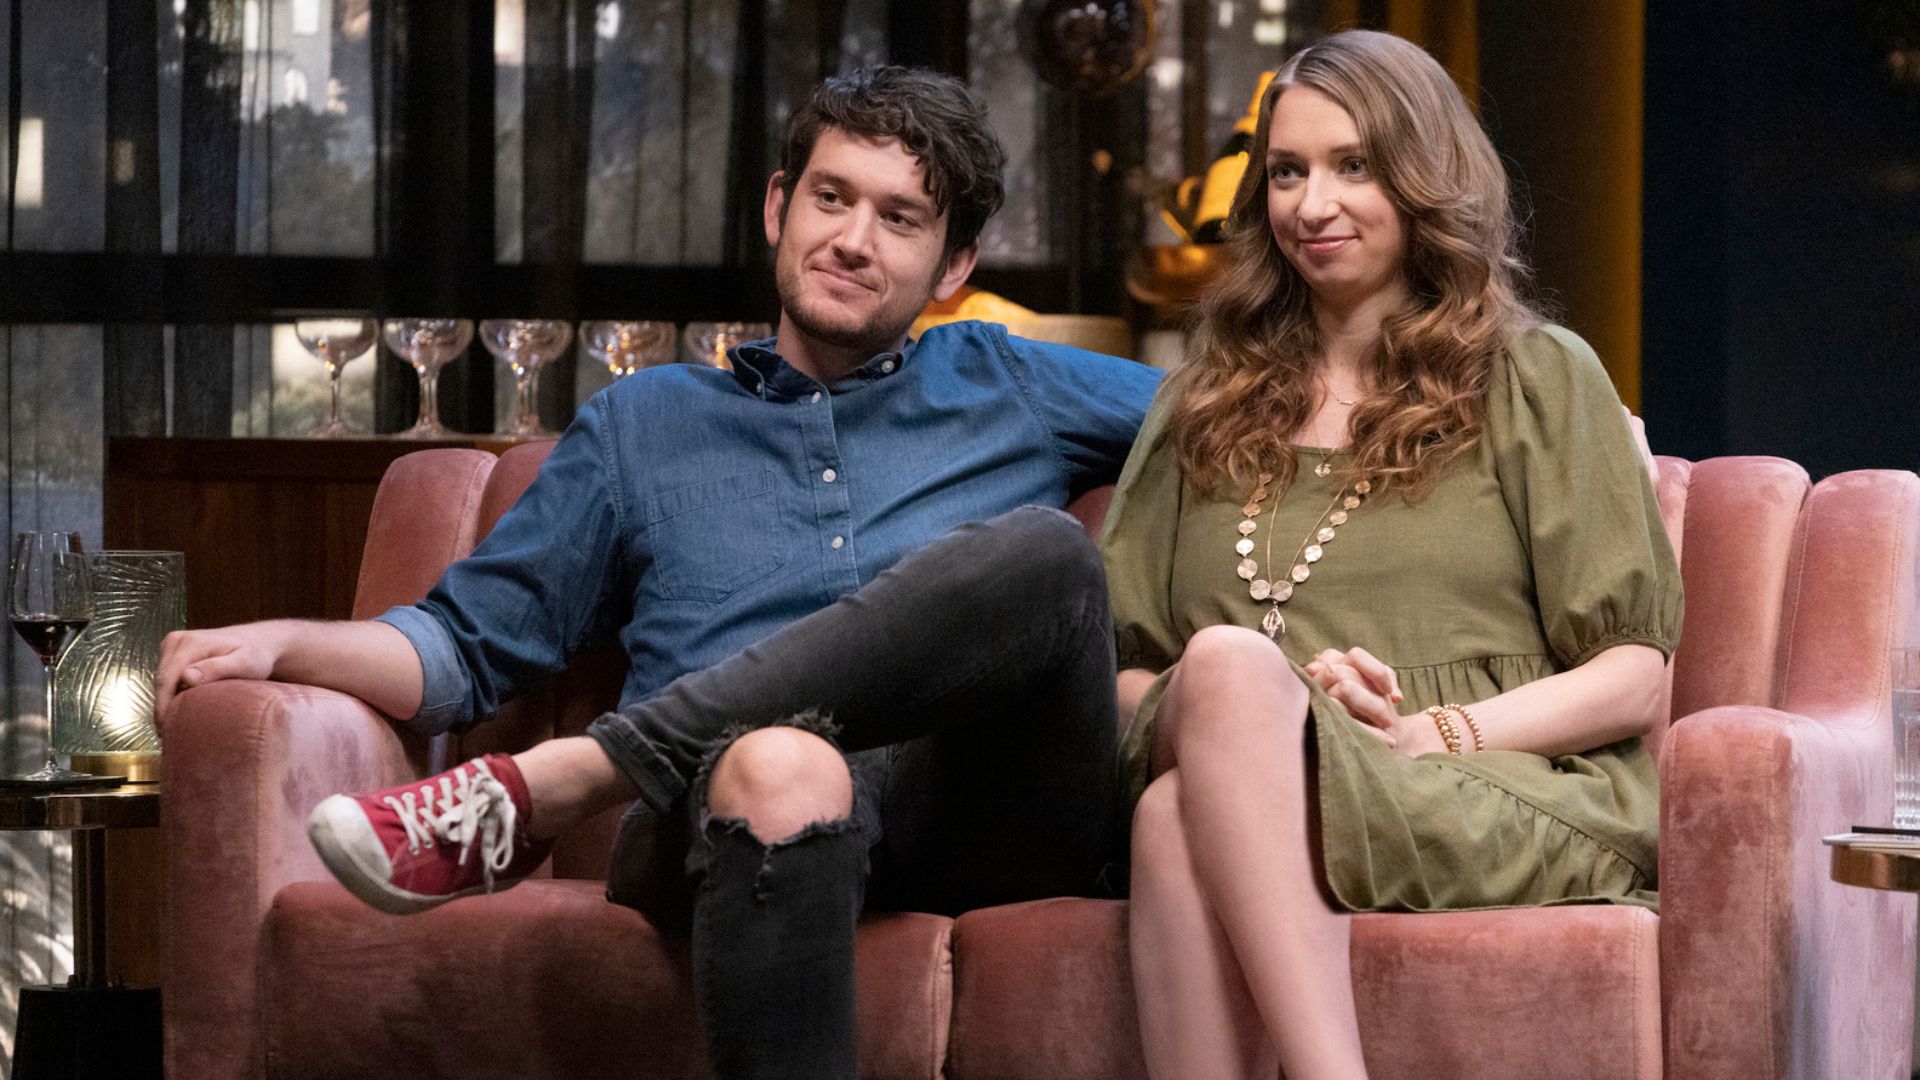 Lauren Lapkus's Husband And The Arrival Of Their Baby